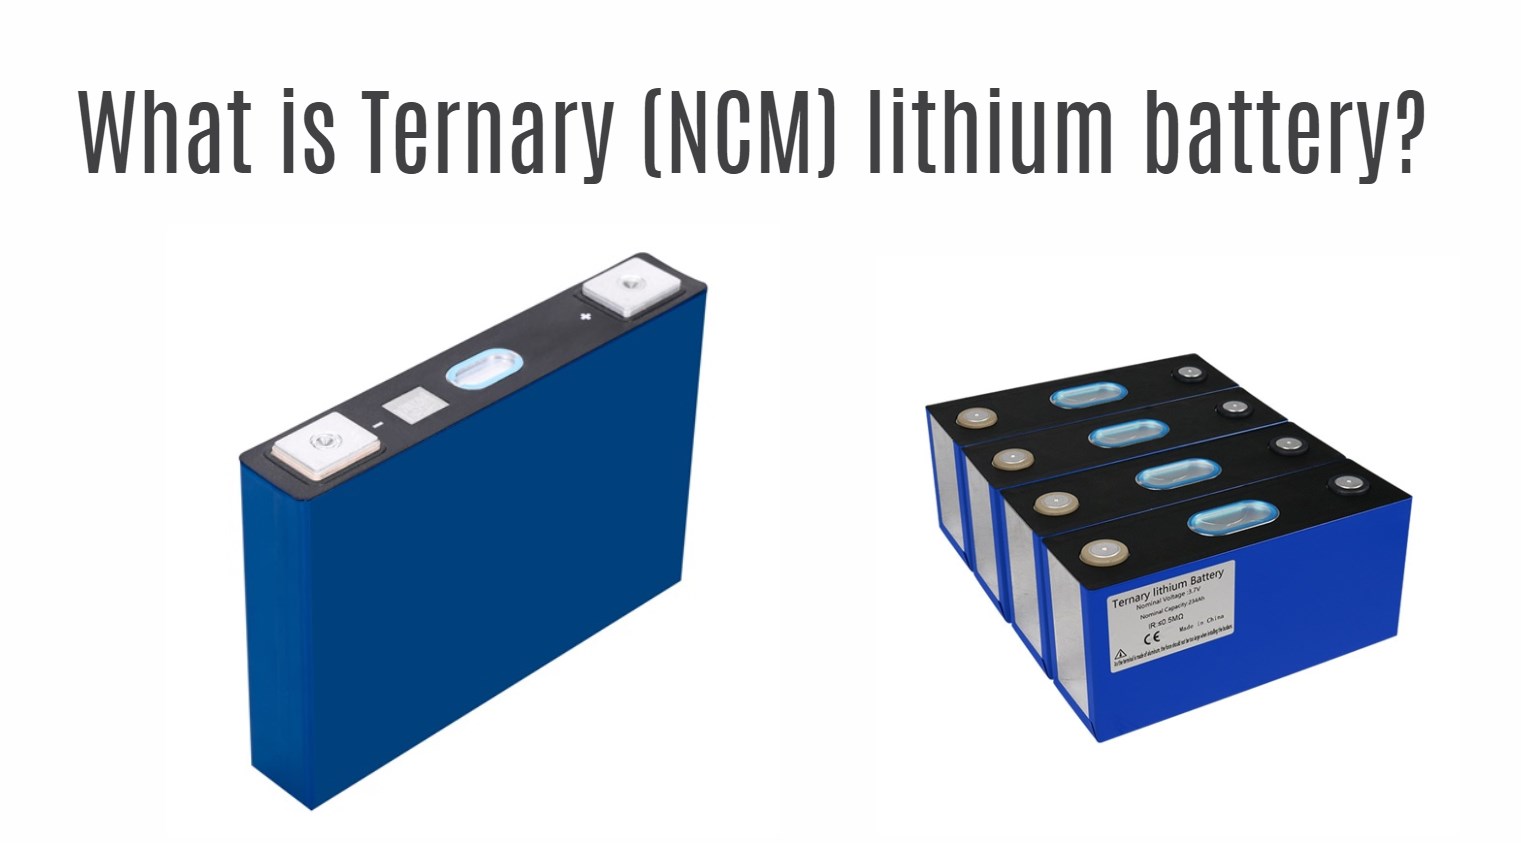 What is Ternary (NCM) lithium battery?